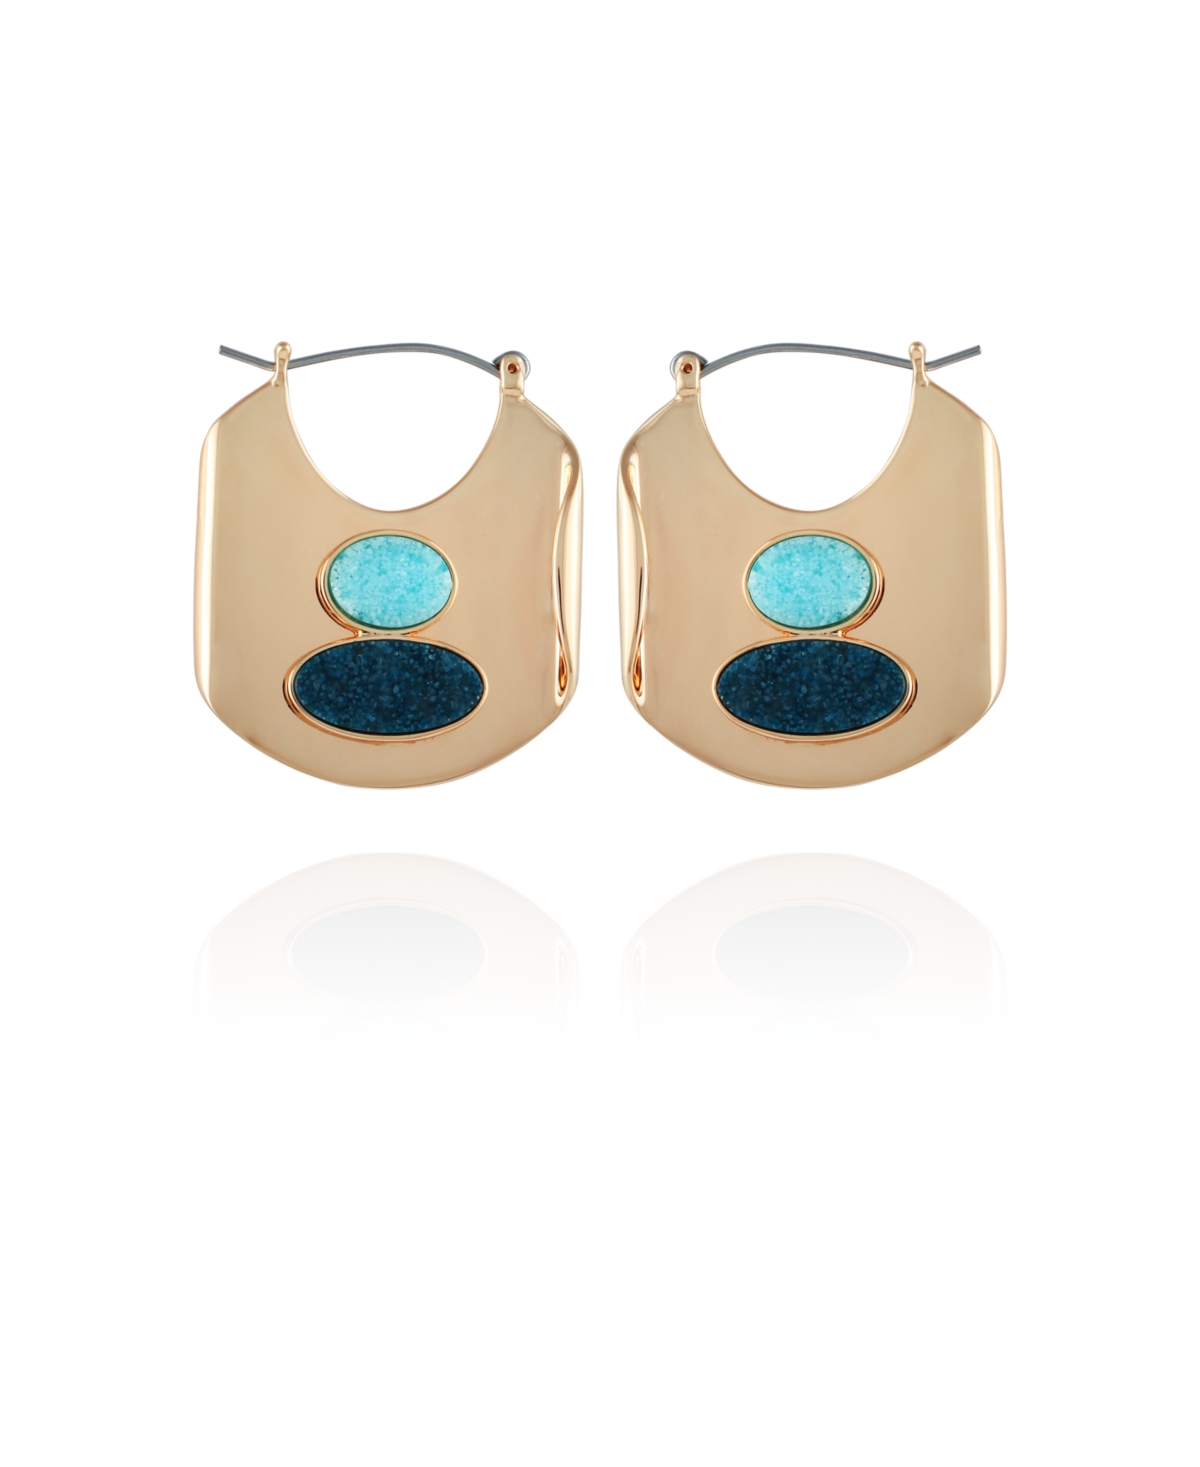 14K Gold-Plated and Blue Oval Hoop Earring - K Gold-Plated, Blue